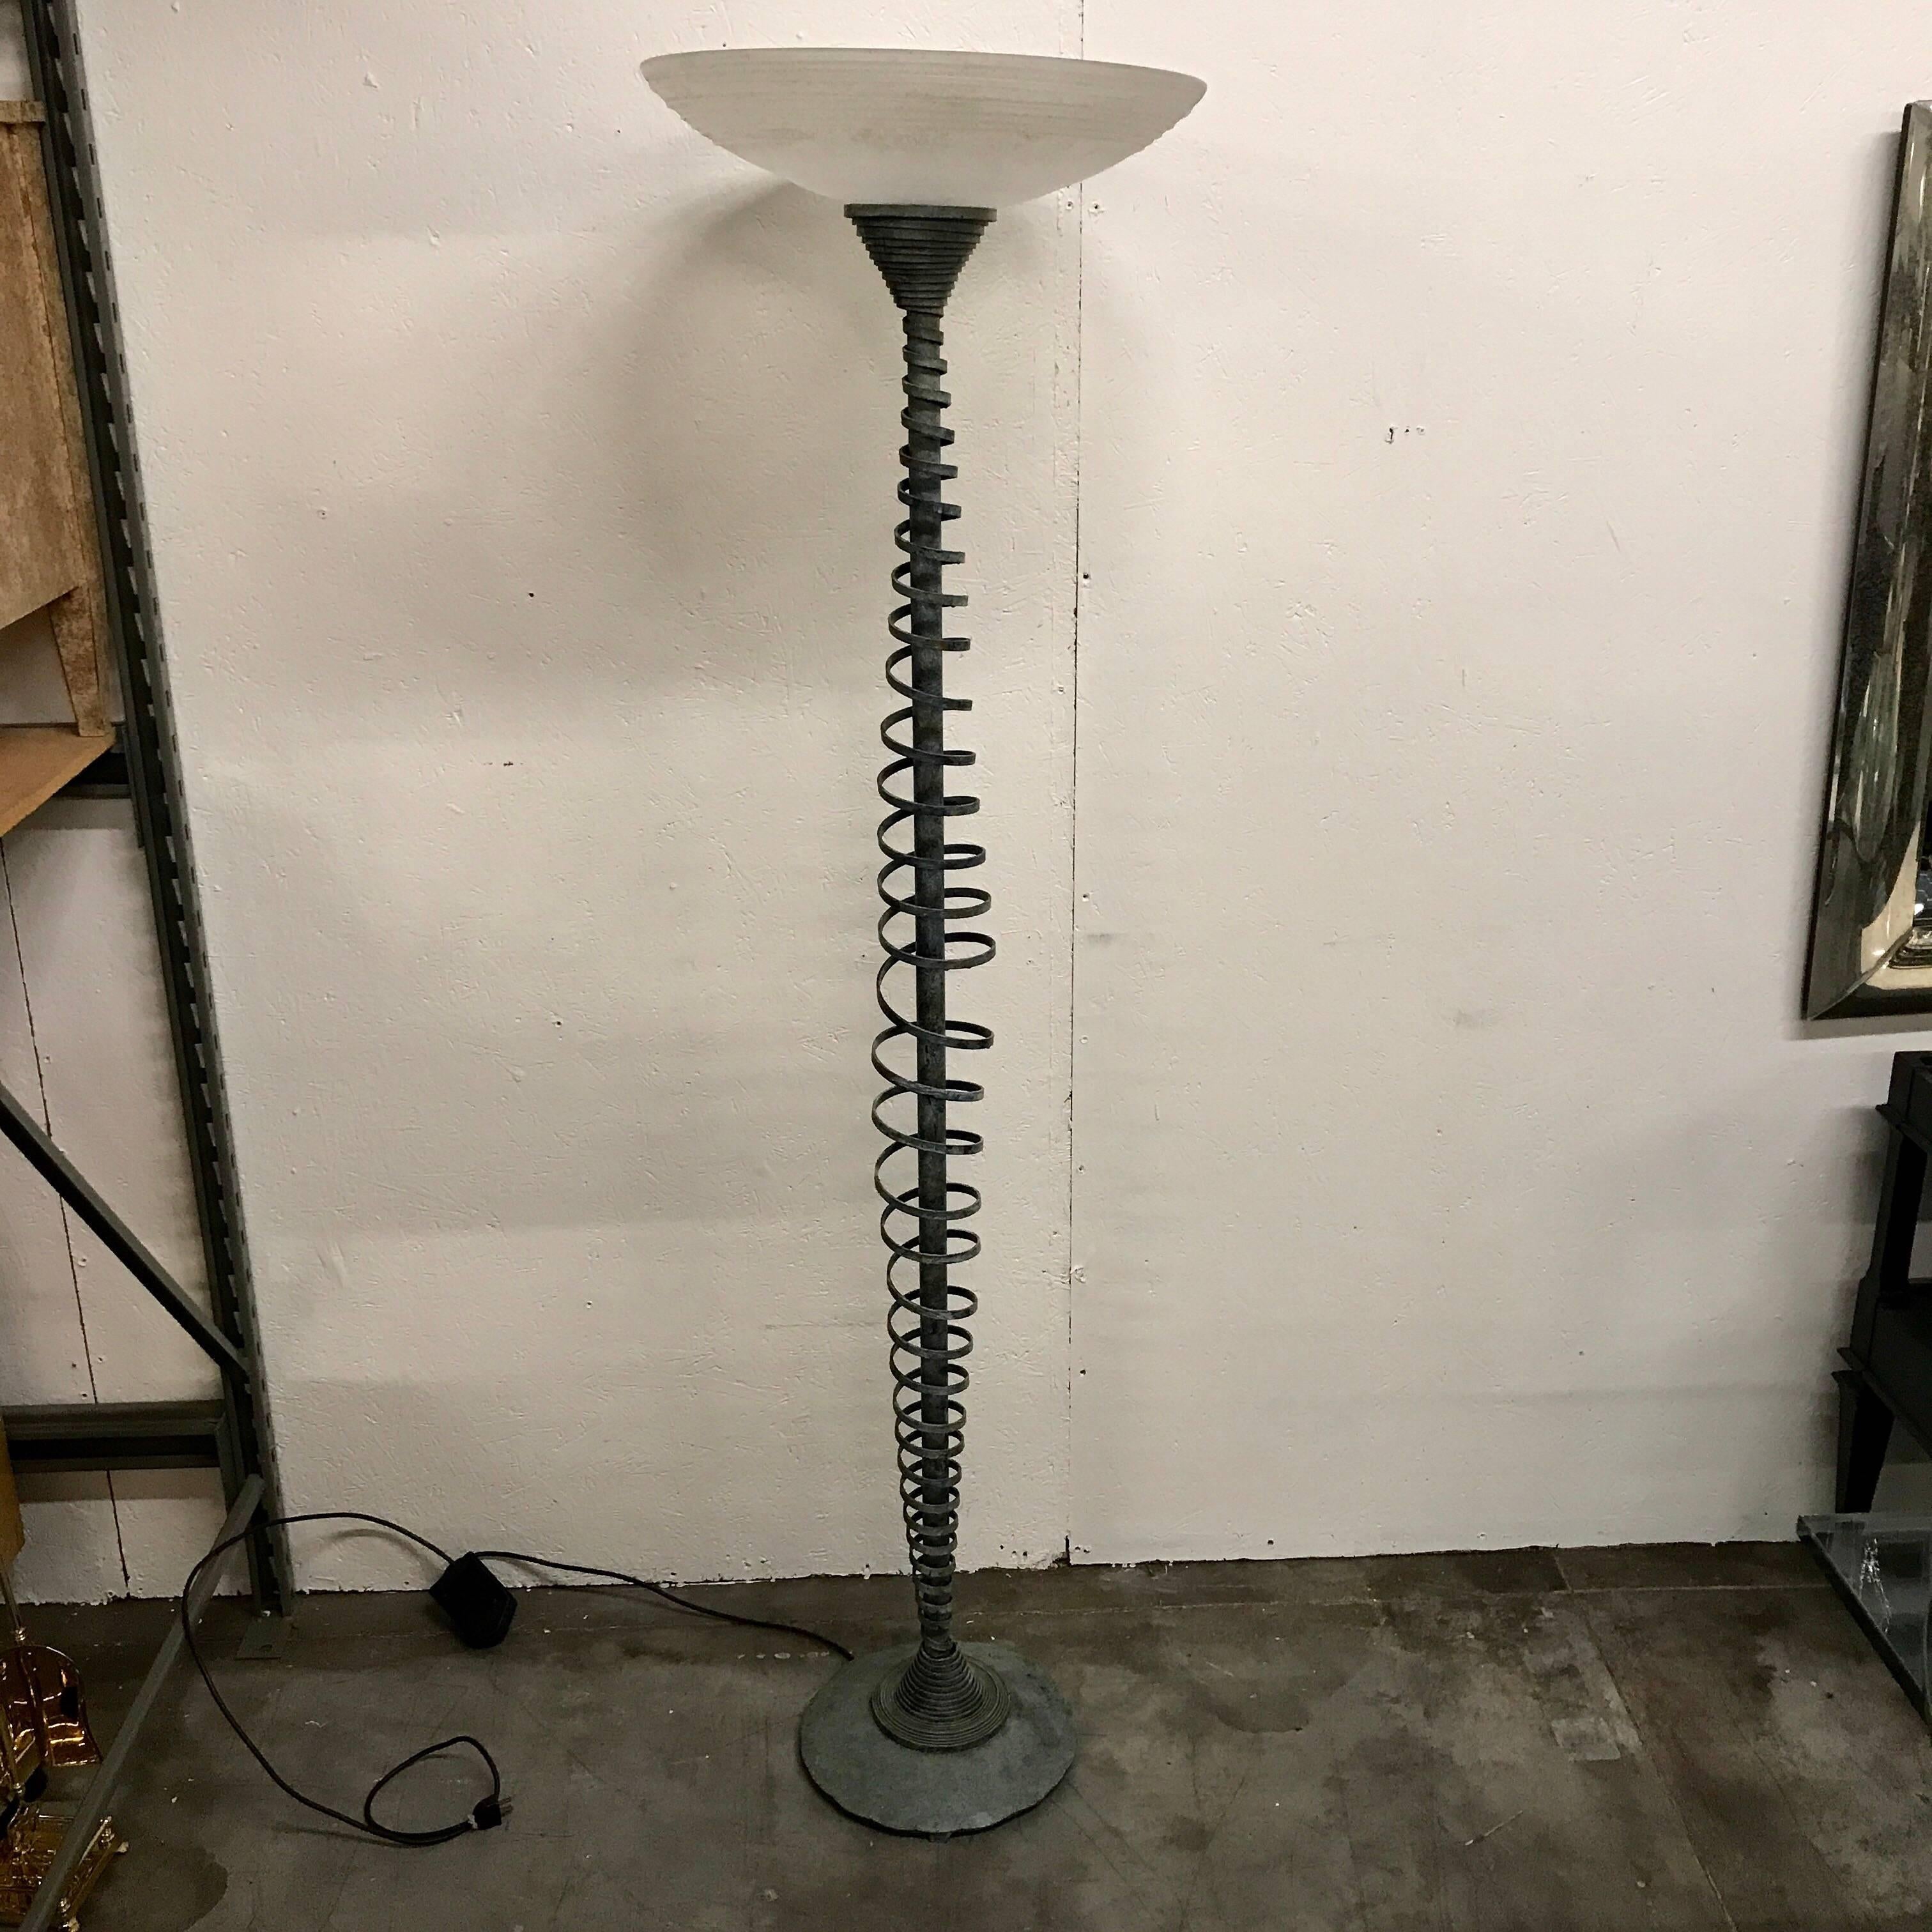 Italian midcentury Murano glass and kinetic bronze floor lamp, fitted with an opaque Murano glass shade, on a cast verdigris bronze circular moveable spiral column. The base has a 12